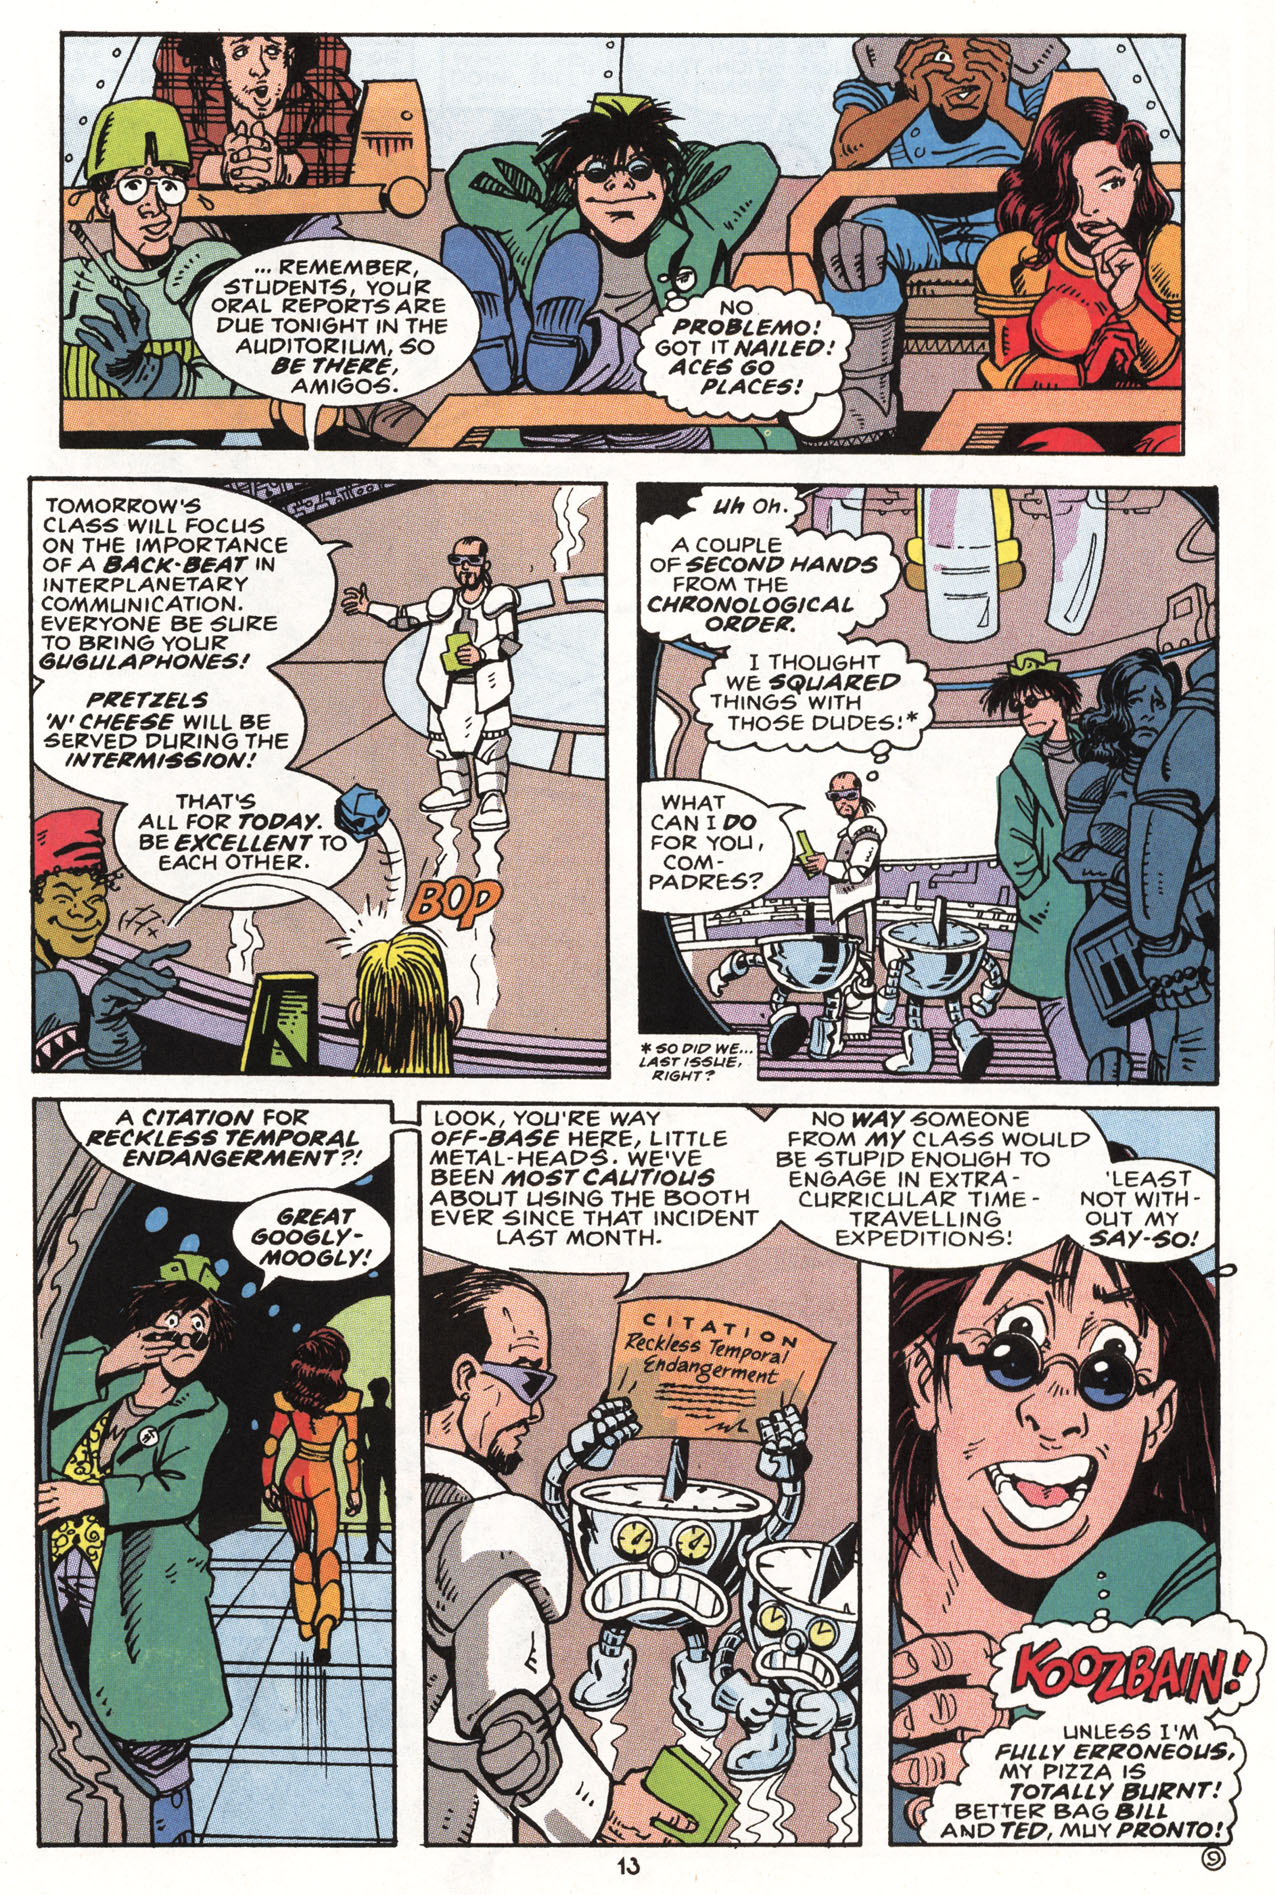 Read online Bill & Ted's Excellent Comic Book comic -  Issue #8 - 15